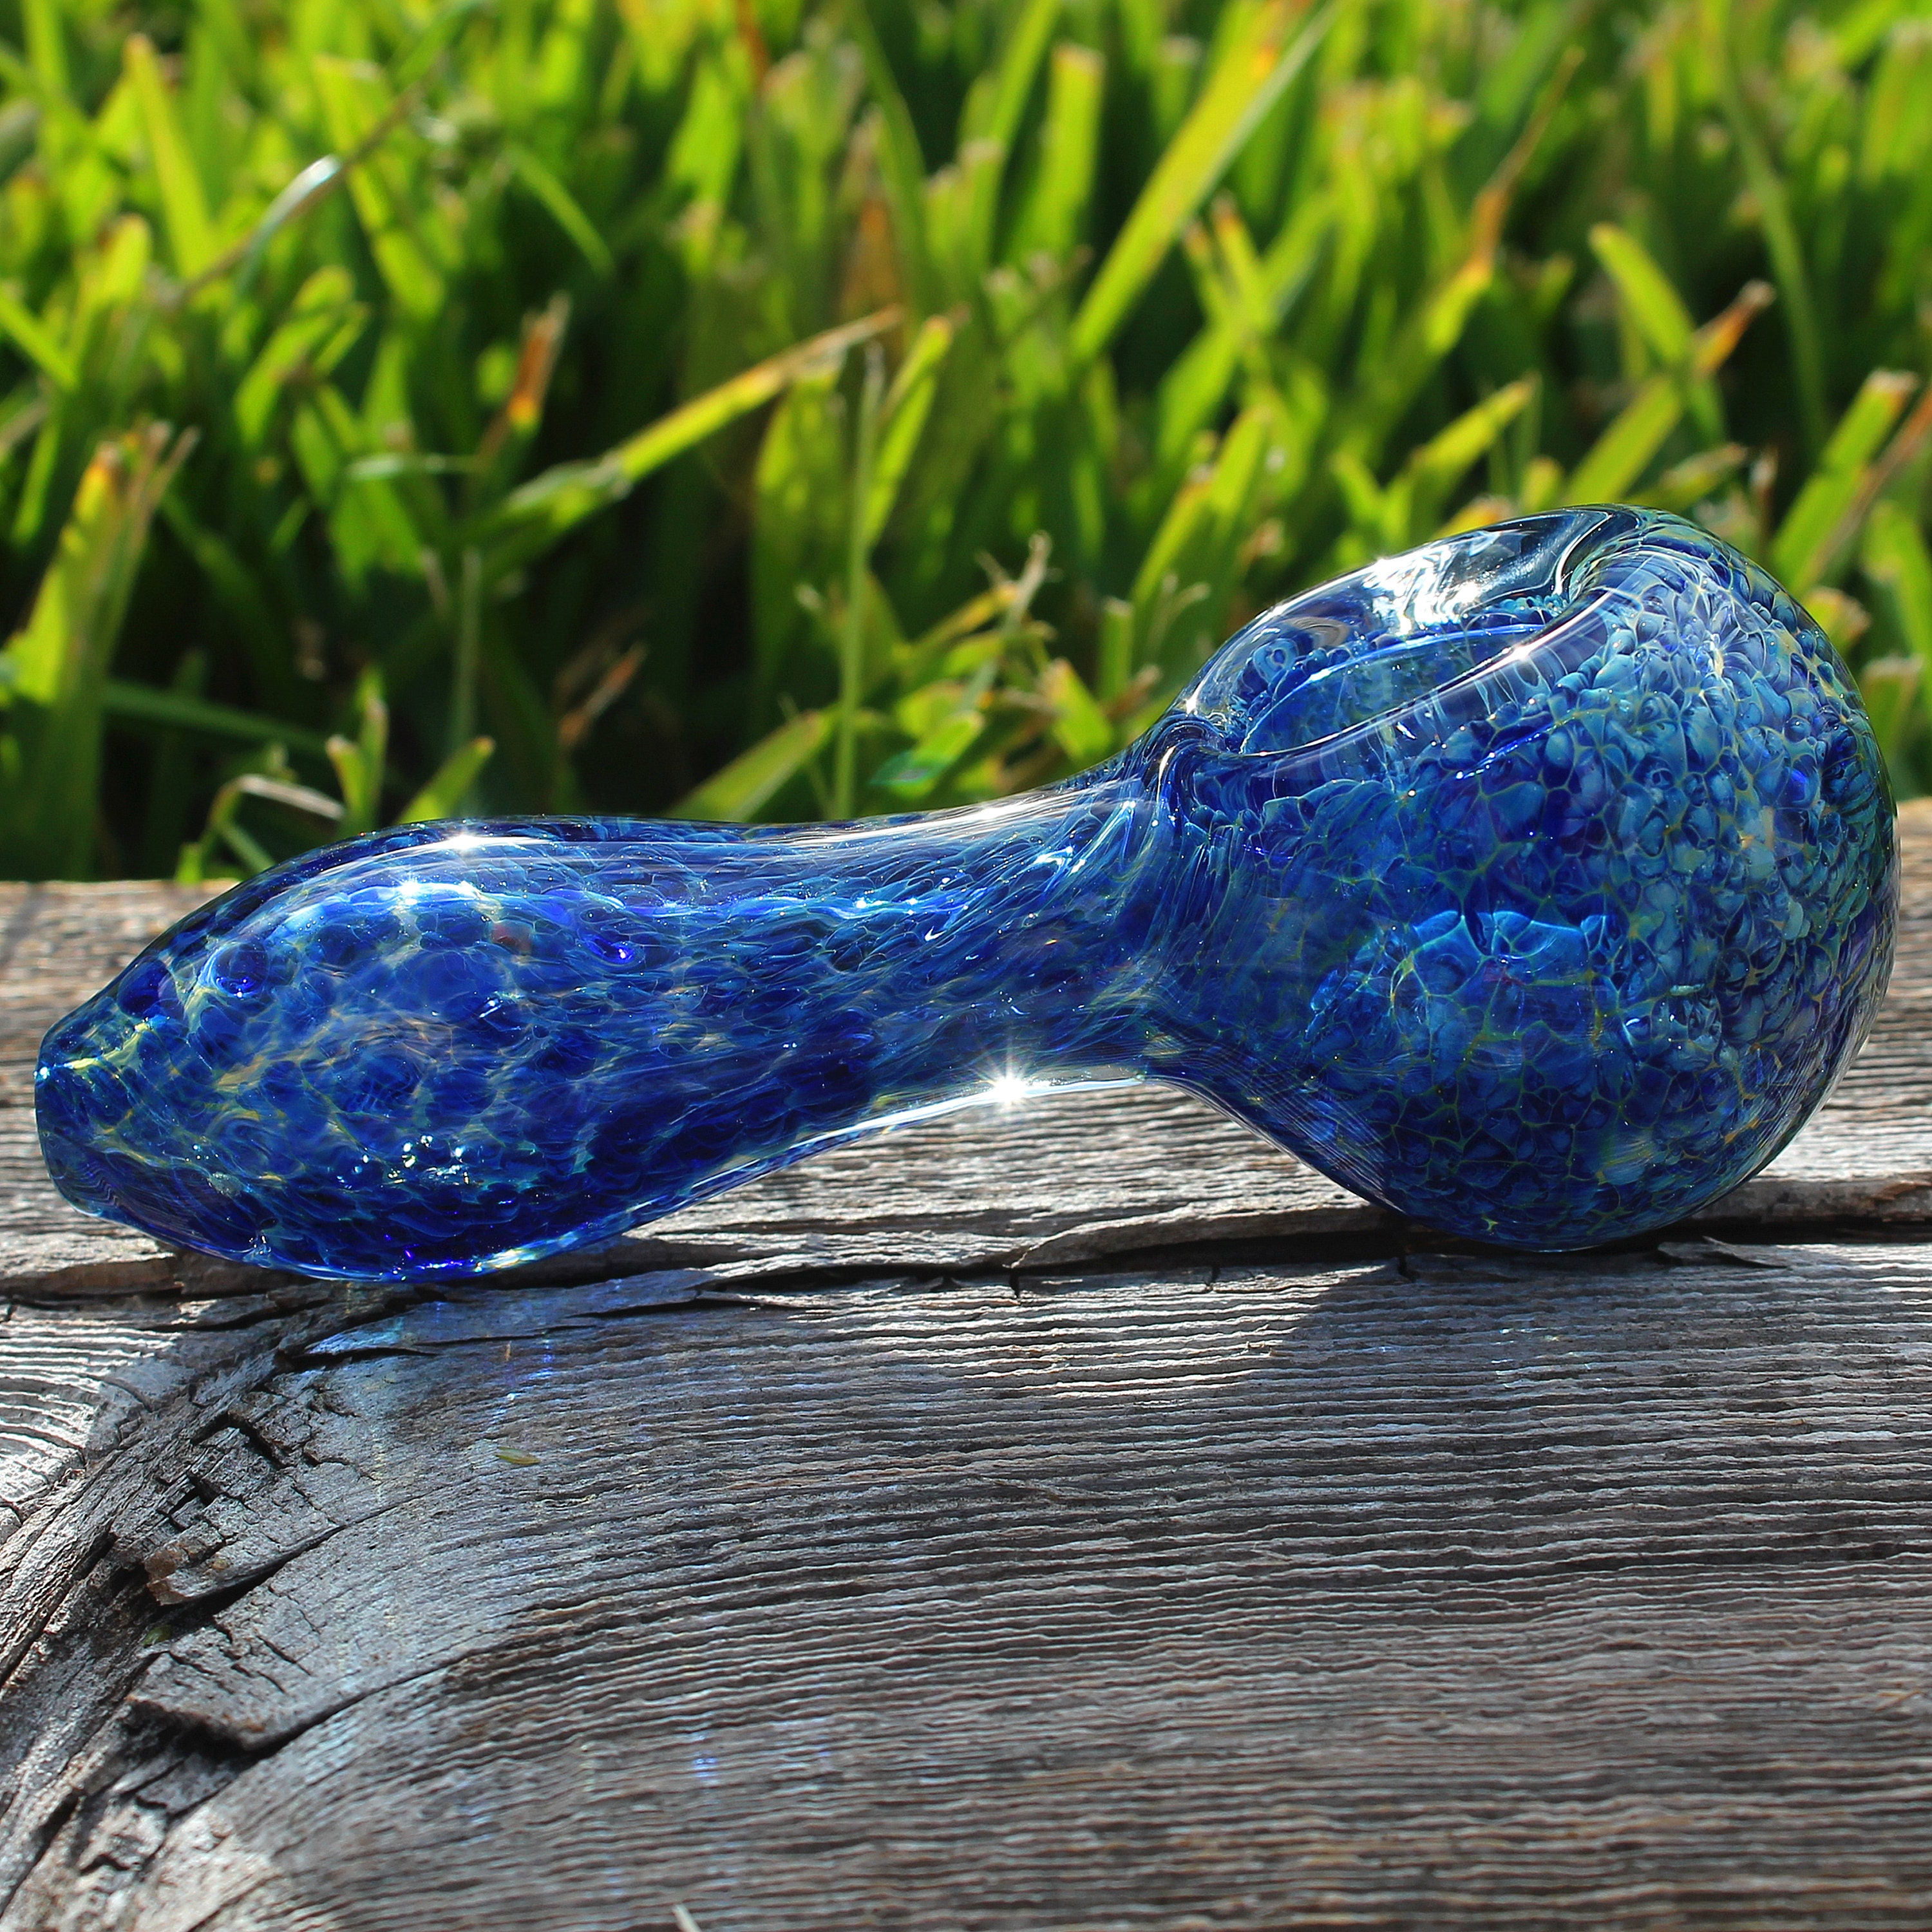 4 Glass Smoke Bowl new Life and new Cell Fumed Smoking Pipes Bowls Tobacco  Pipe Unique Handmade Collectible Blue Purple Red Girly Gift 